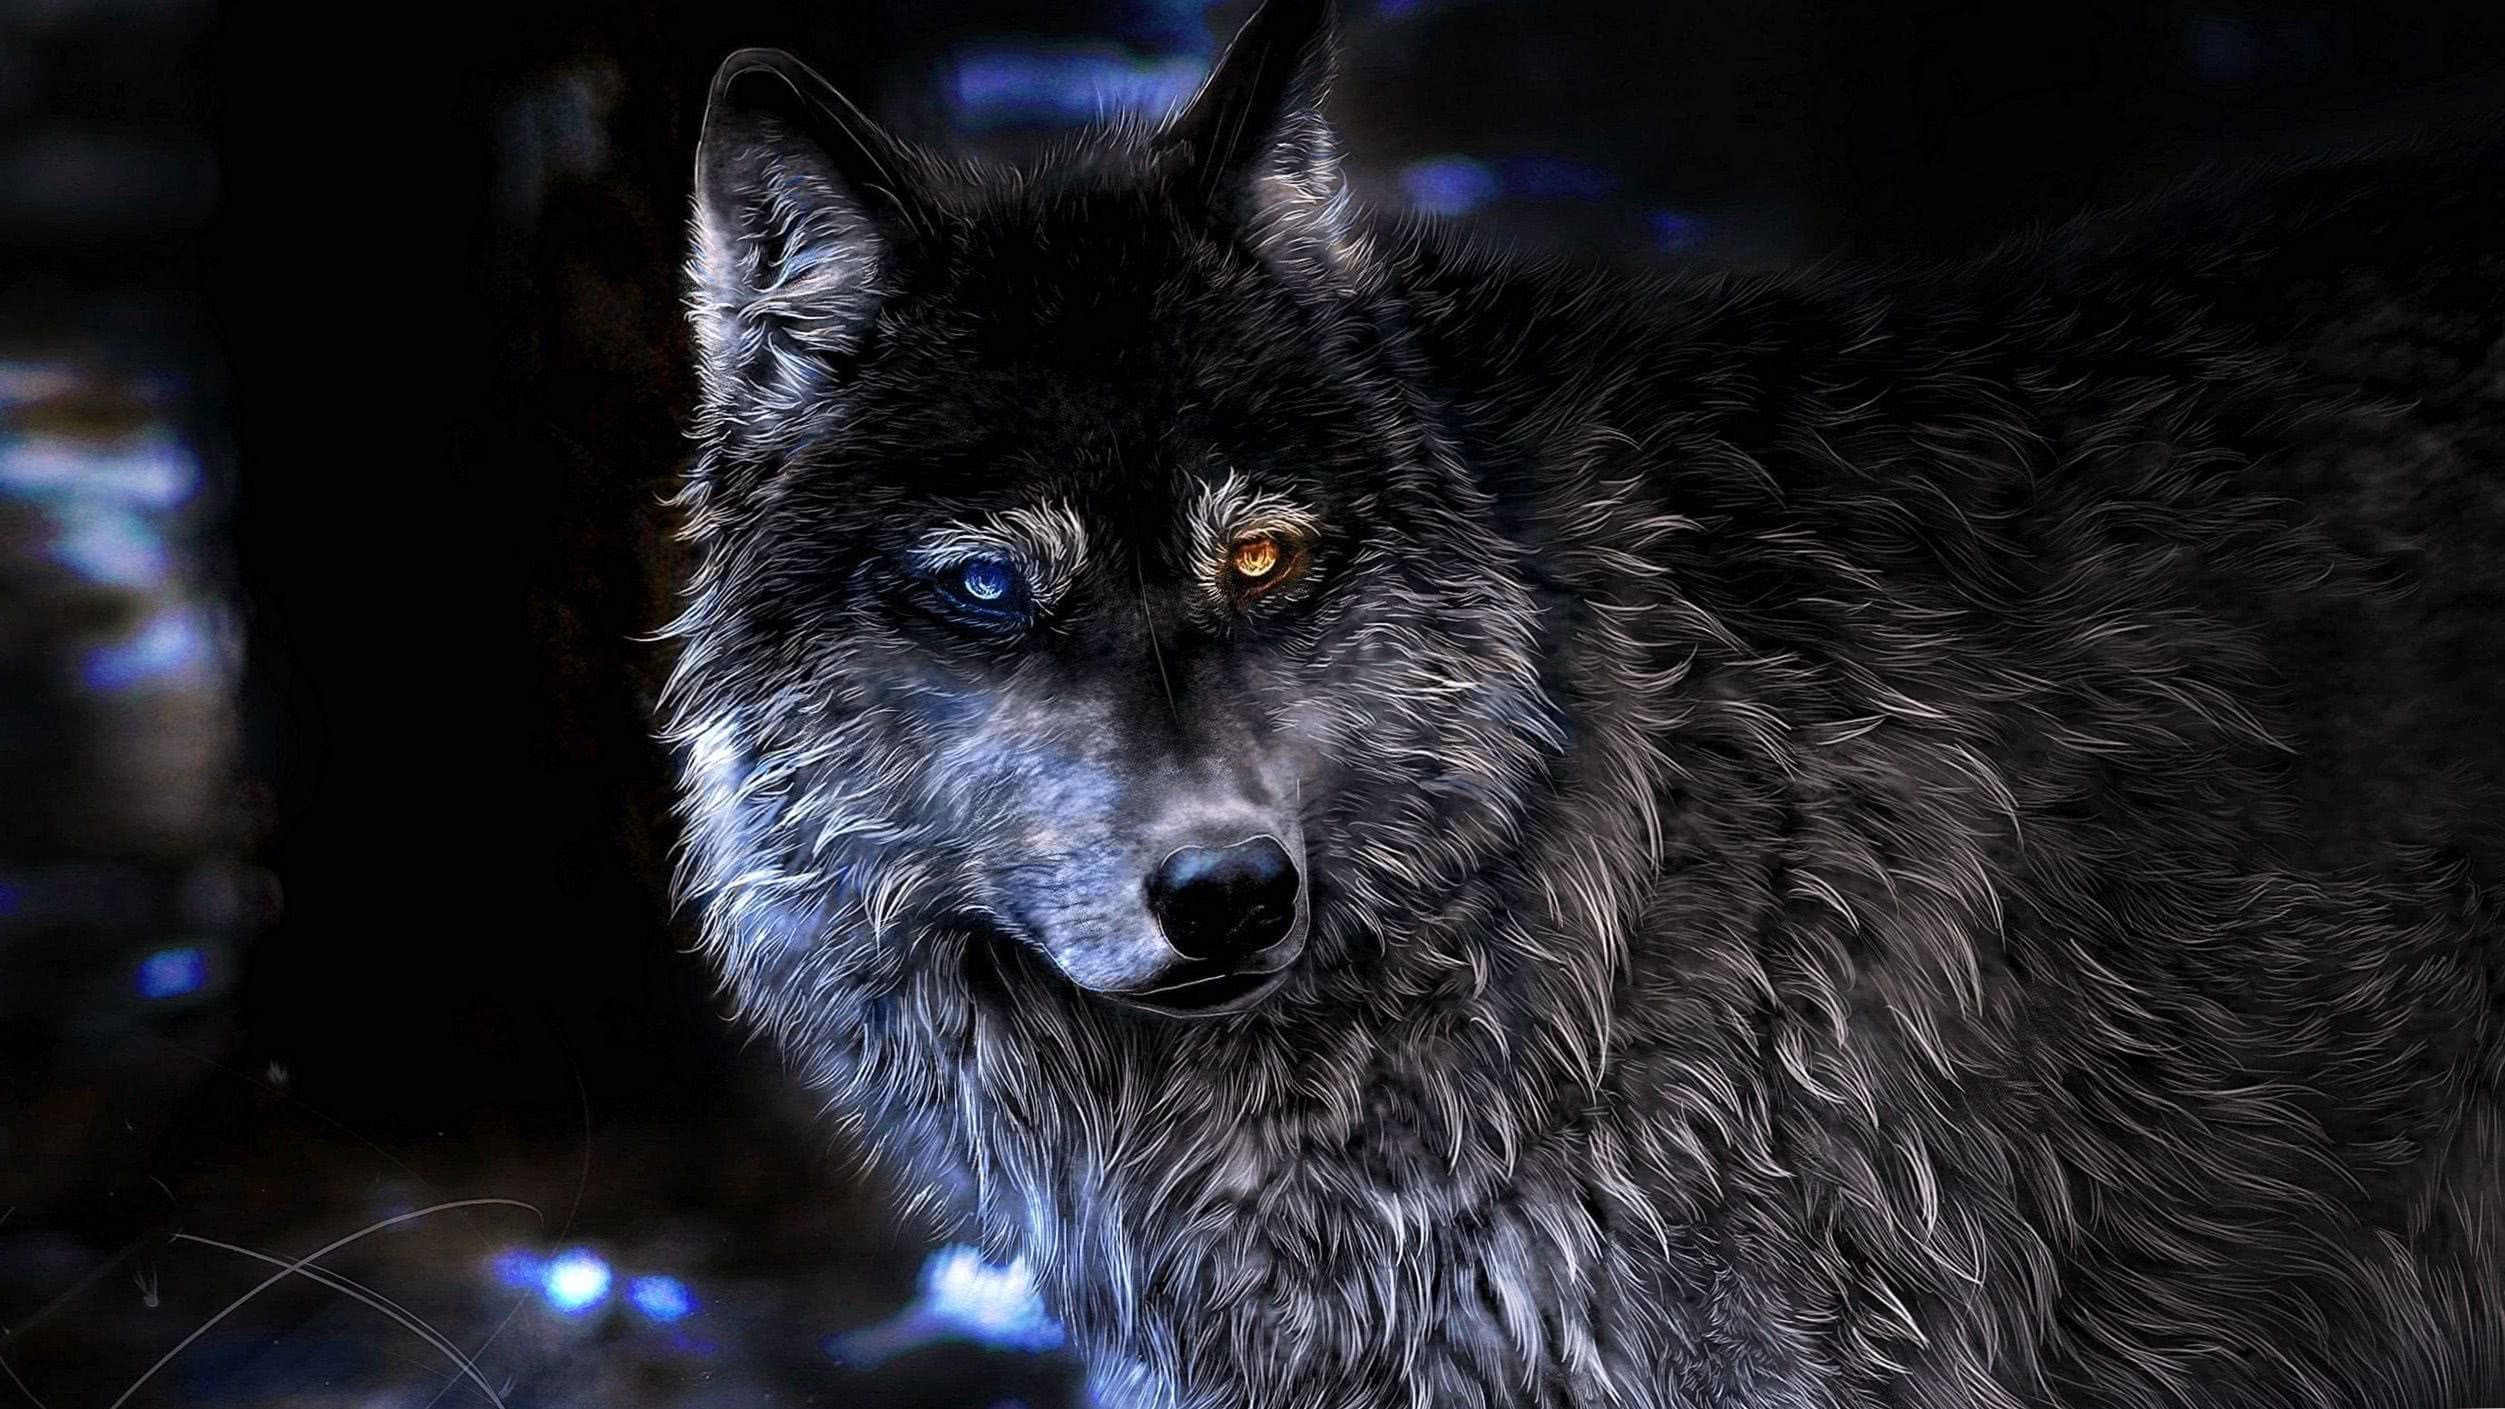 Wolf Wallpapers 2560x1440 free download